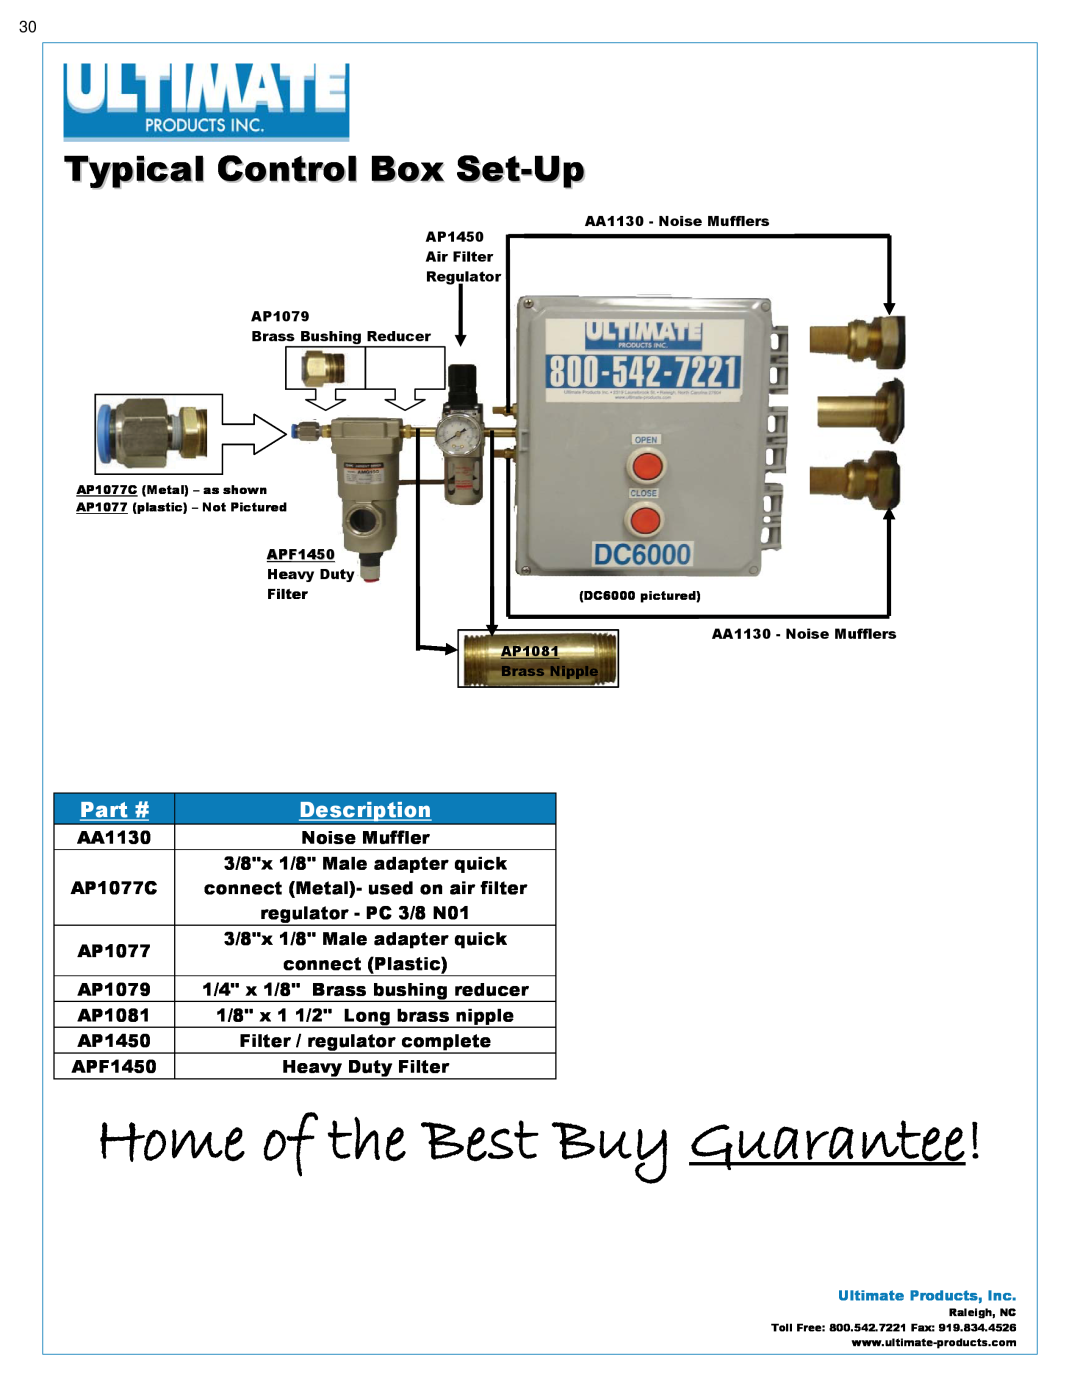 Ultimate Products UP-206 manual Typical Control Box Set-Up, Home of the Best Buy Guarantee, Description 